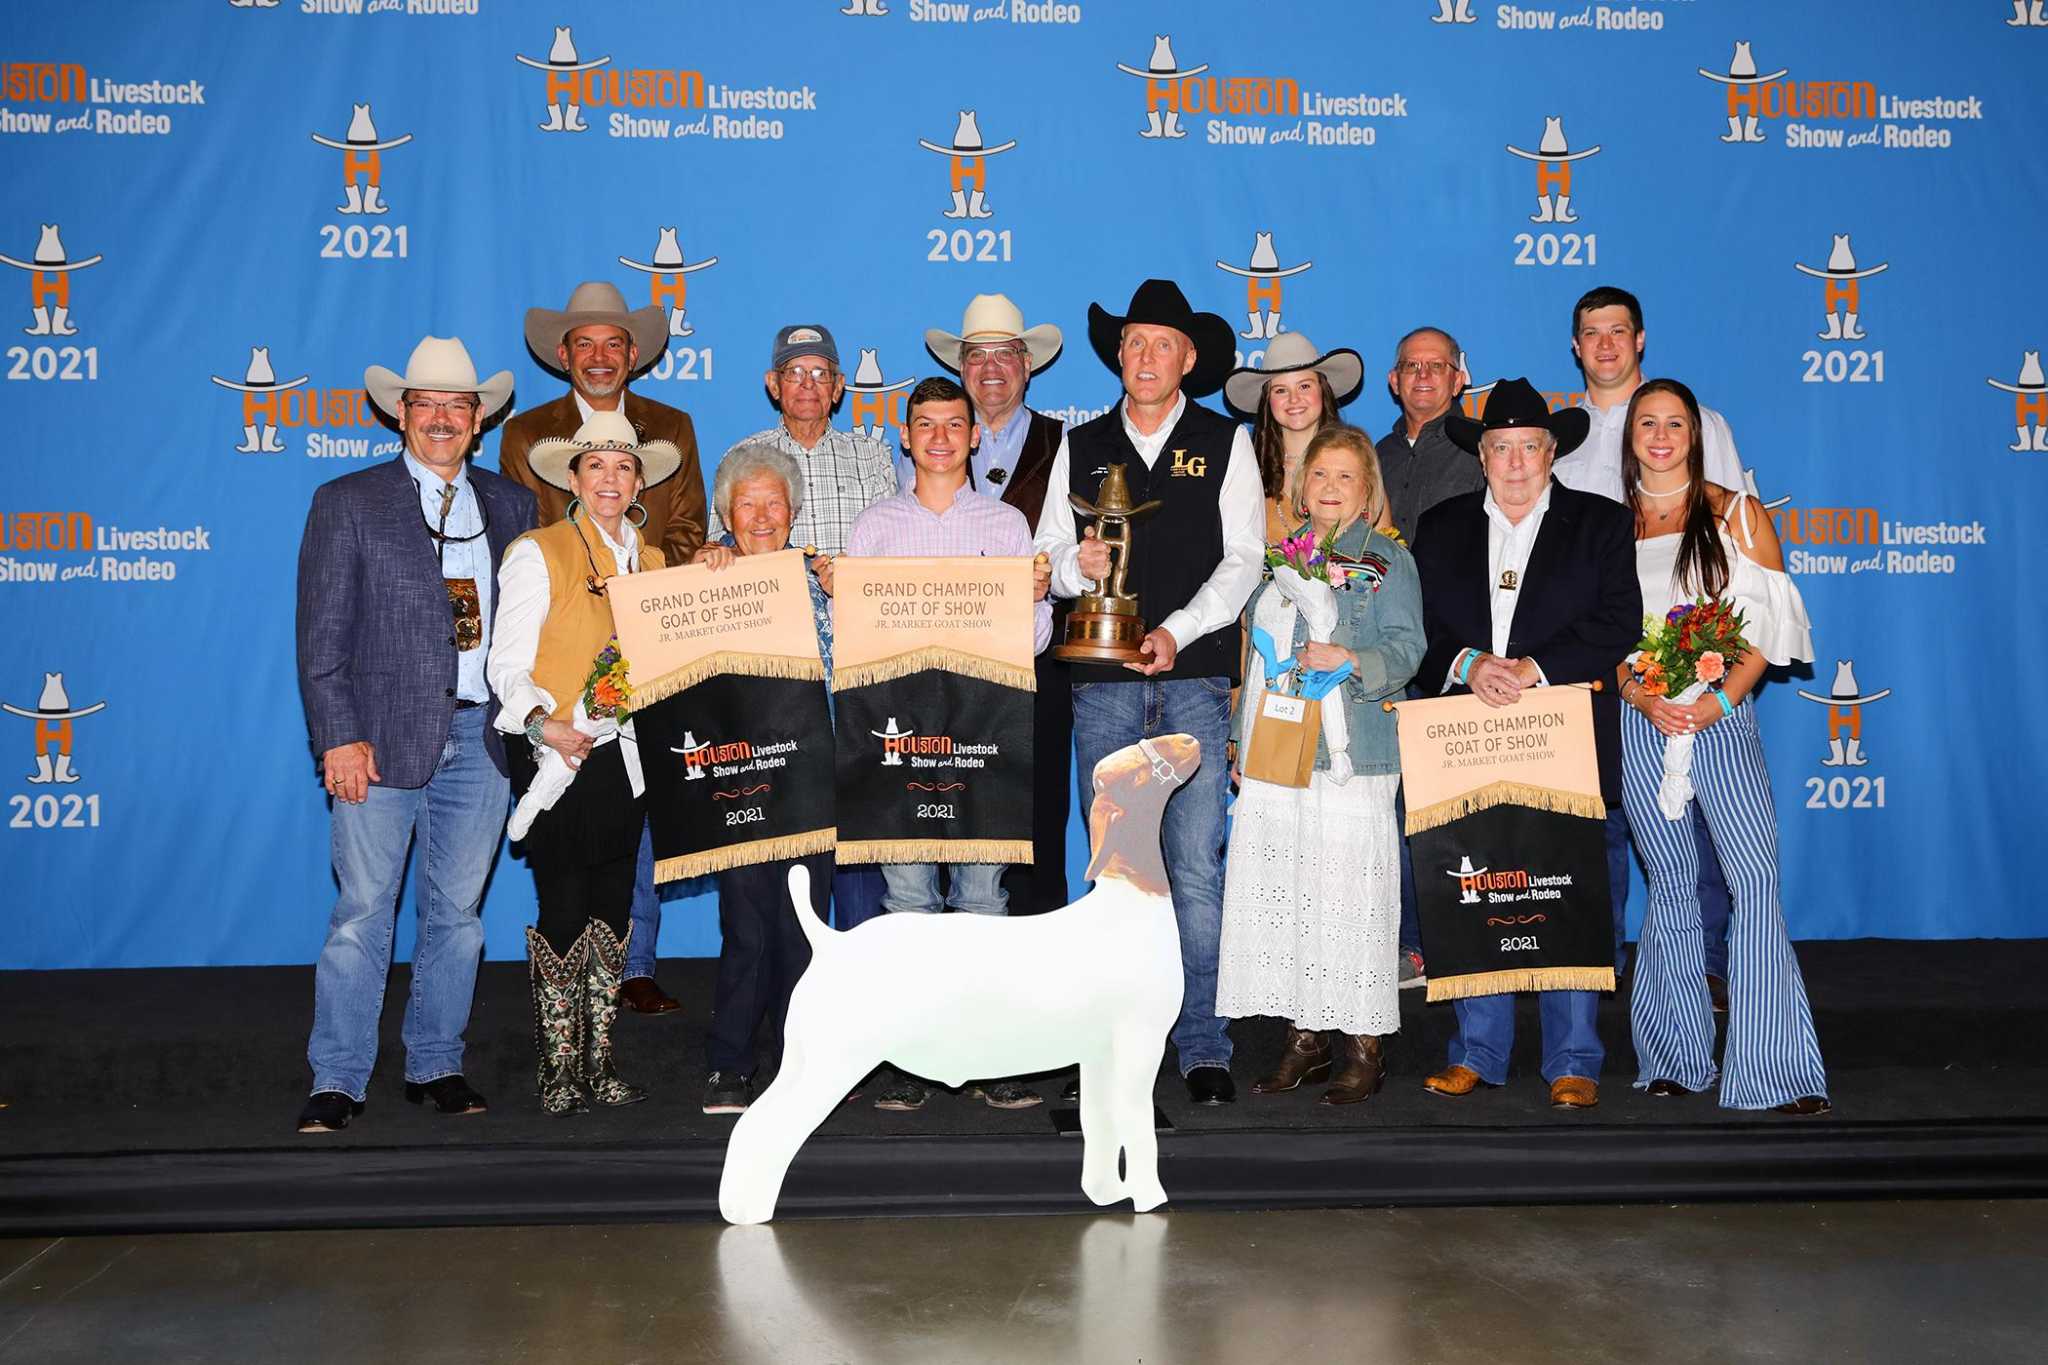 Goat sells for record 185,000 at Houston Livestock Show and Rodeo Junior Market auction